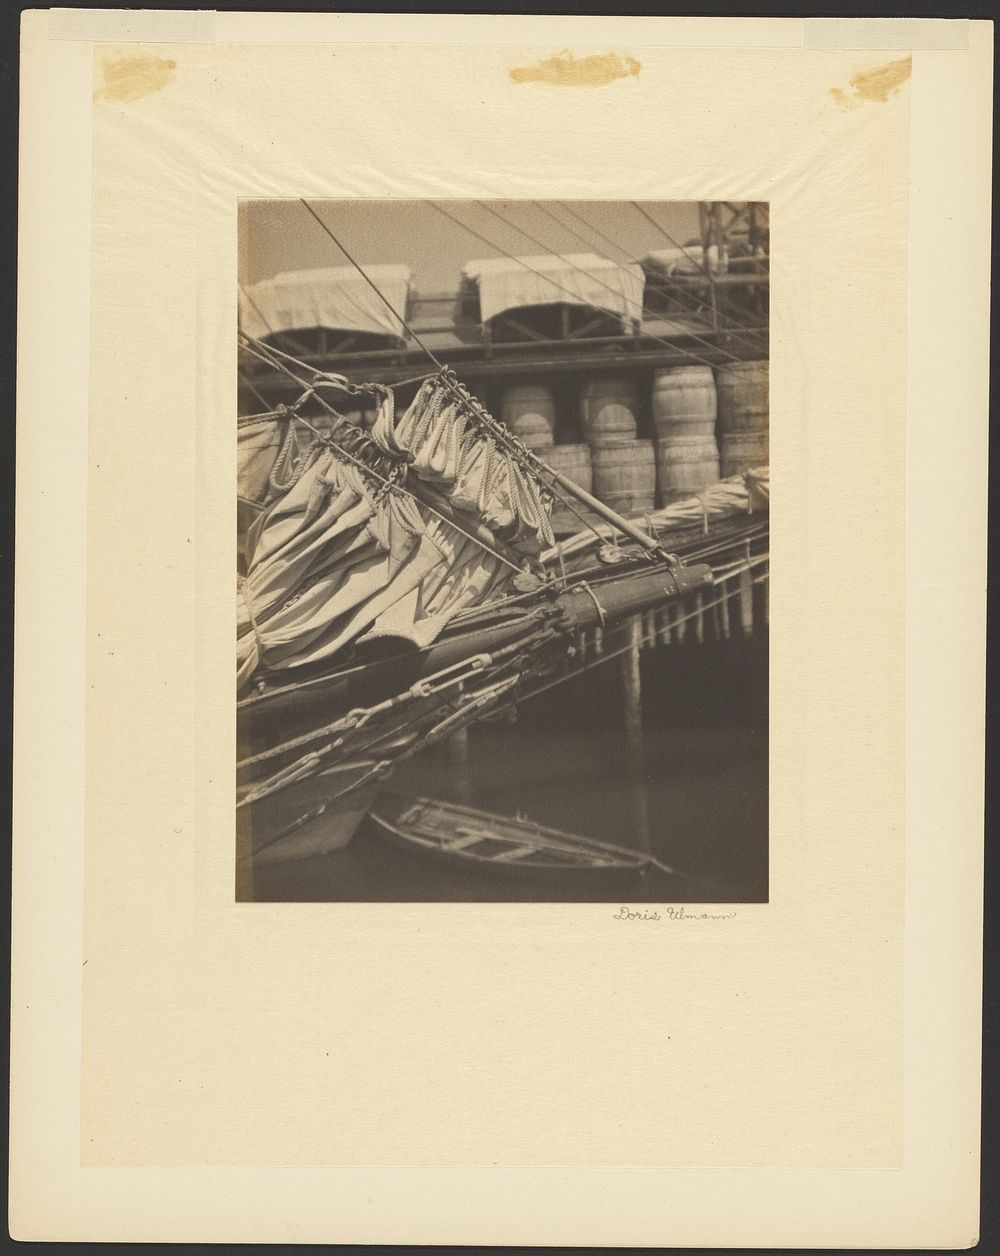 Scene at Dock with Furled Sails and Barrels by Doris Ulmann